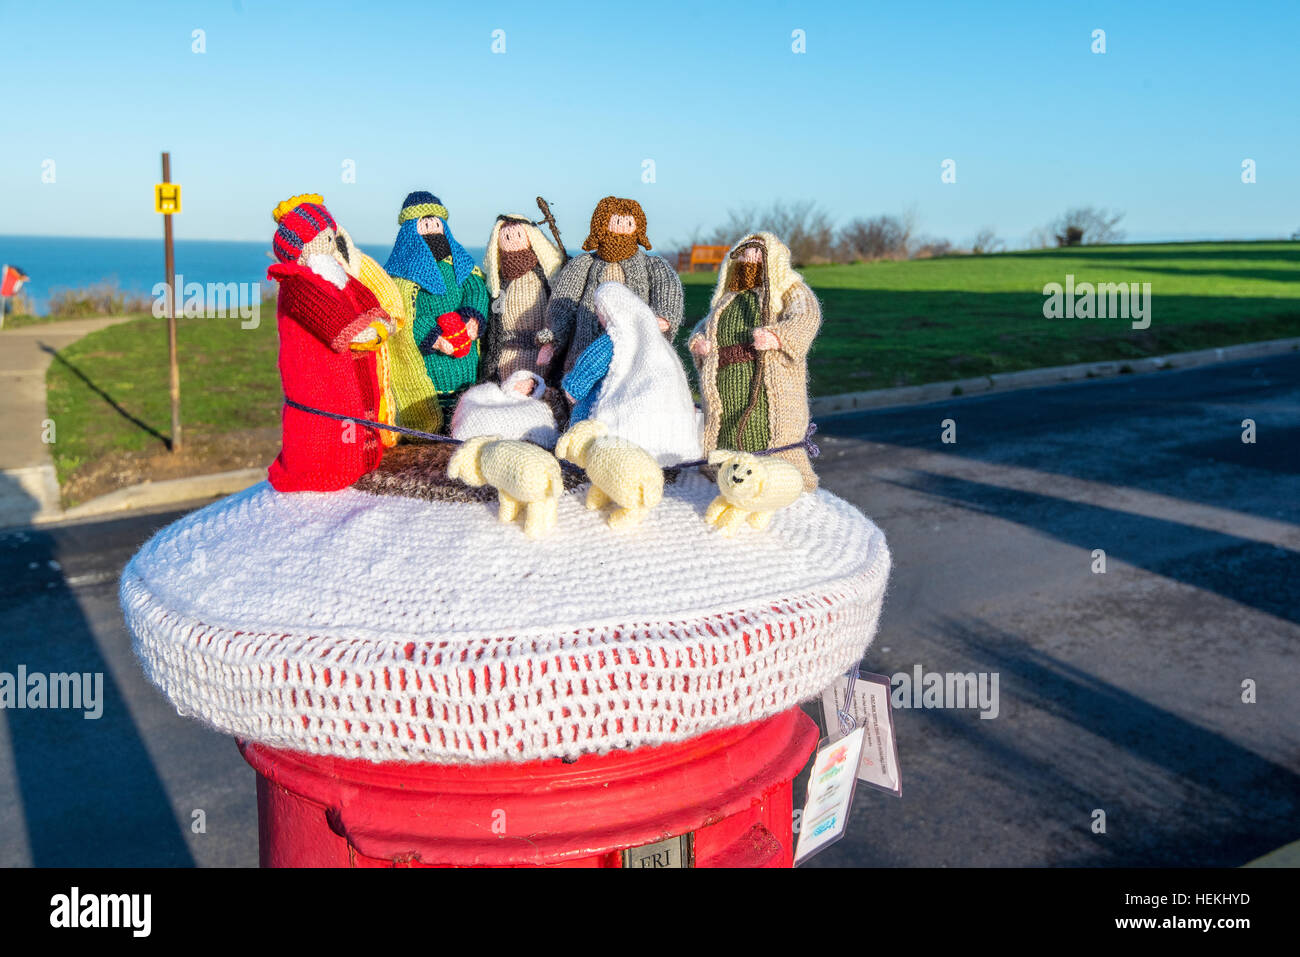 Herne Bay, Kent, UK. 22nd Dec, 2016. Many of the post boxes in Herne Bayhave been topped by knitted characters with a Christmas Theme such as this nativity scene on Beacon Hill. The toppers are the work of a local knitting group called the 'Herne Bay Cosy Crew' © Paul Martin/Alamy Live News Stock Photo